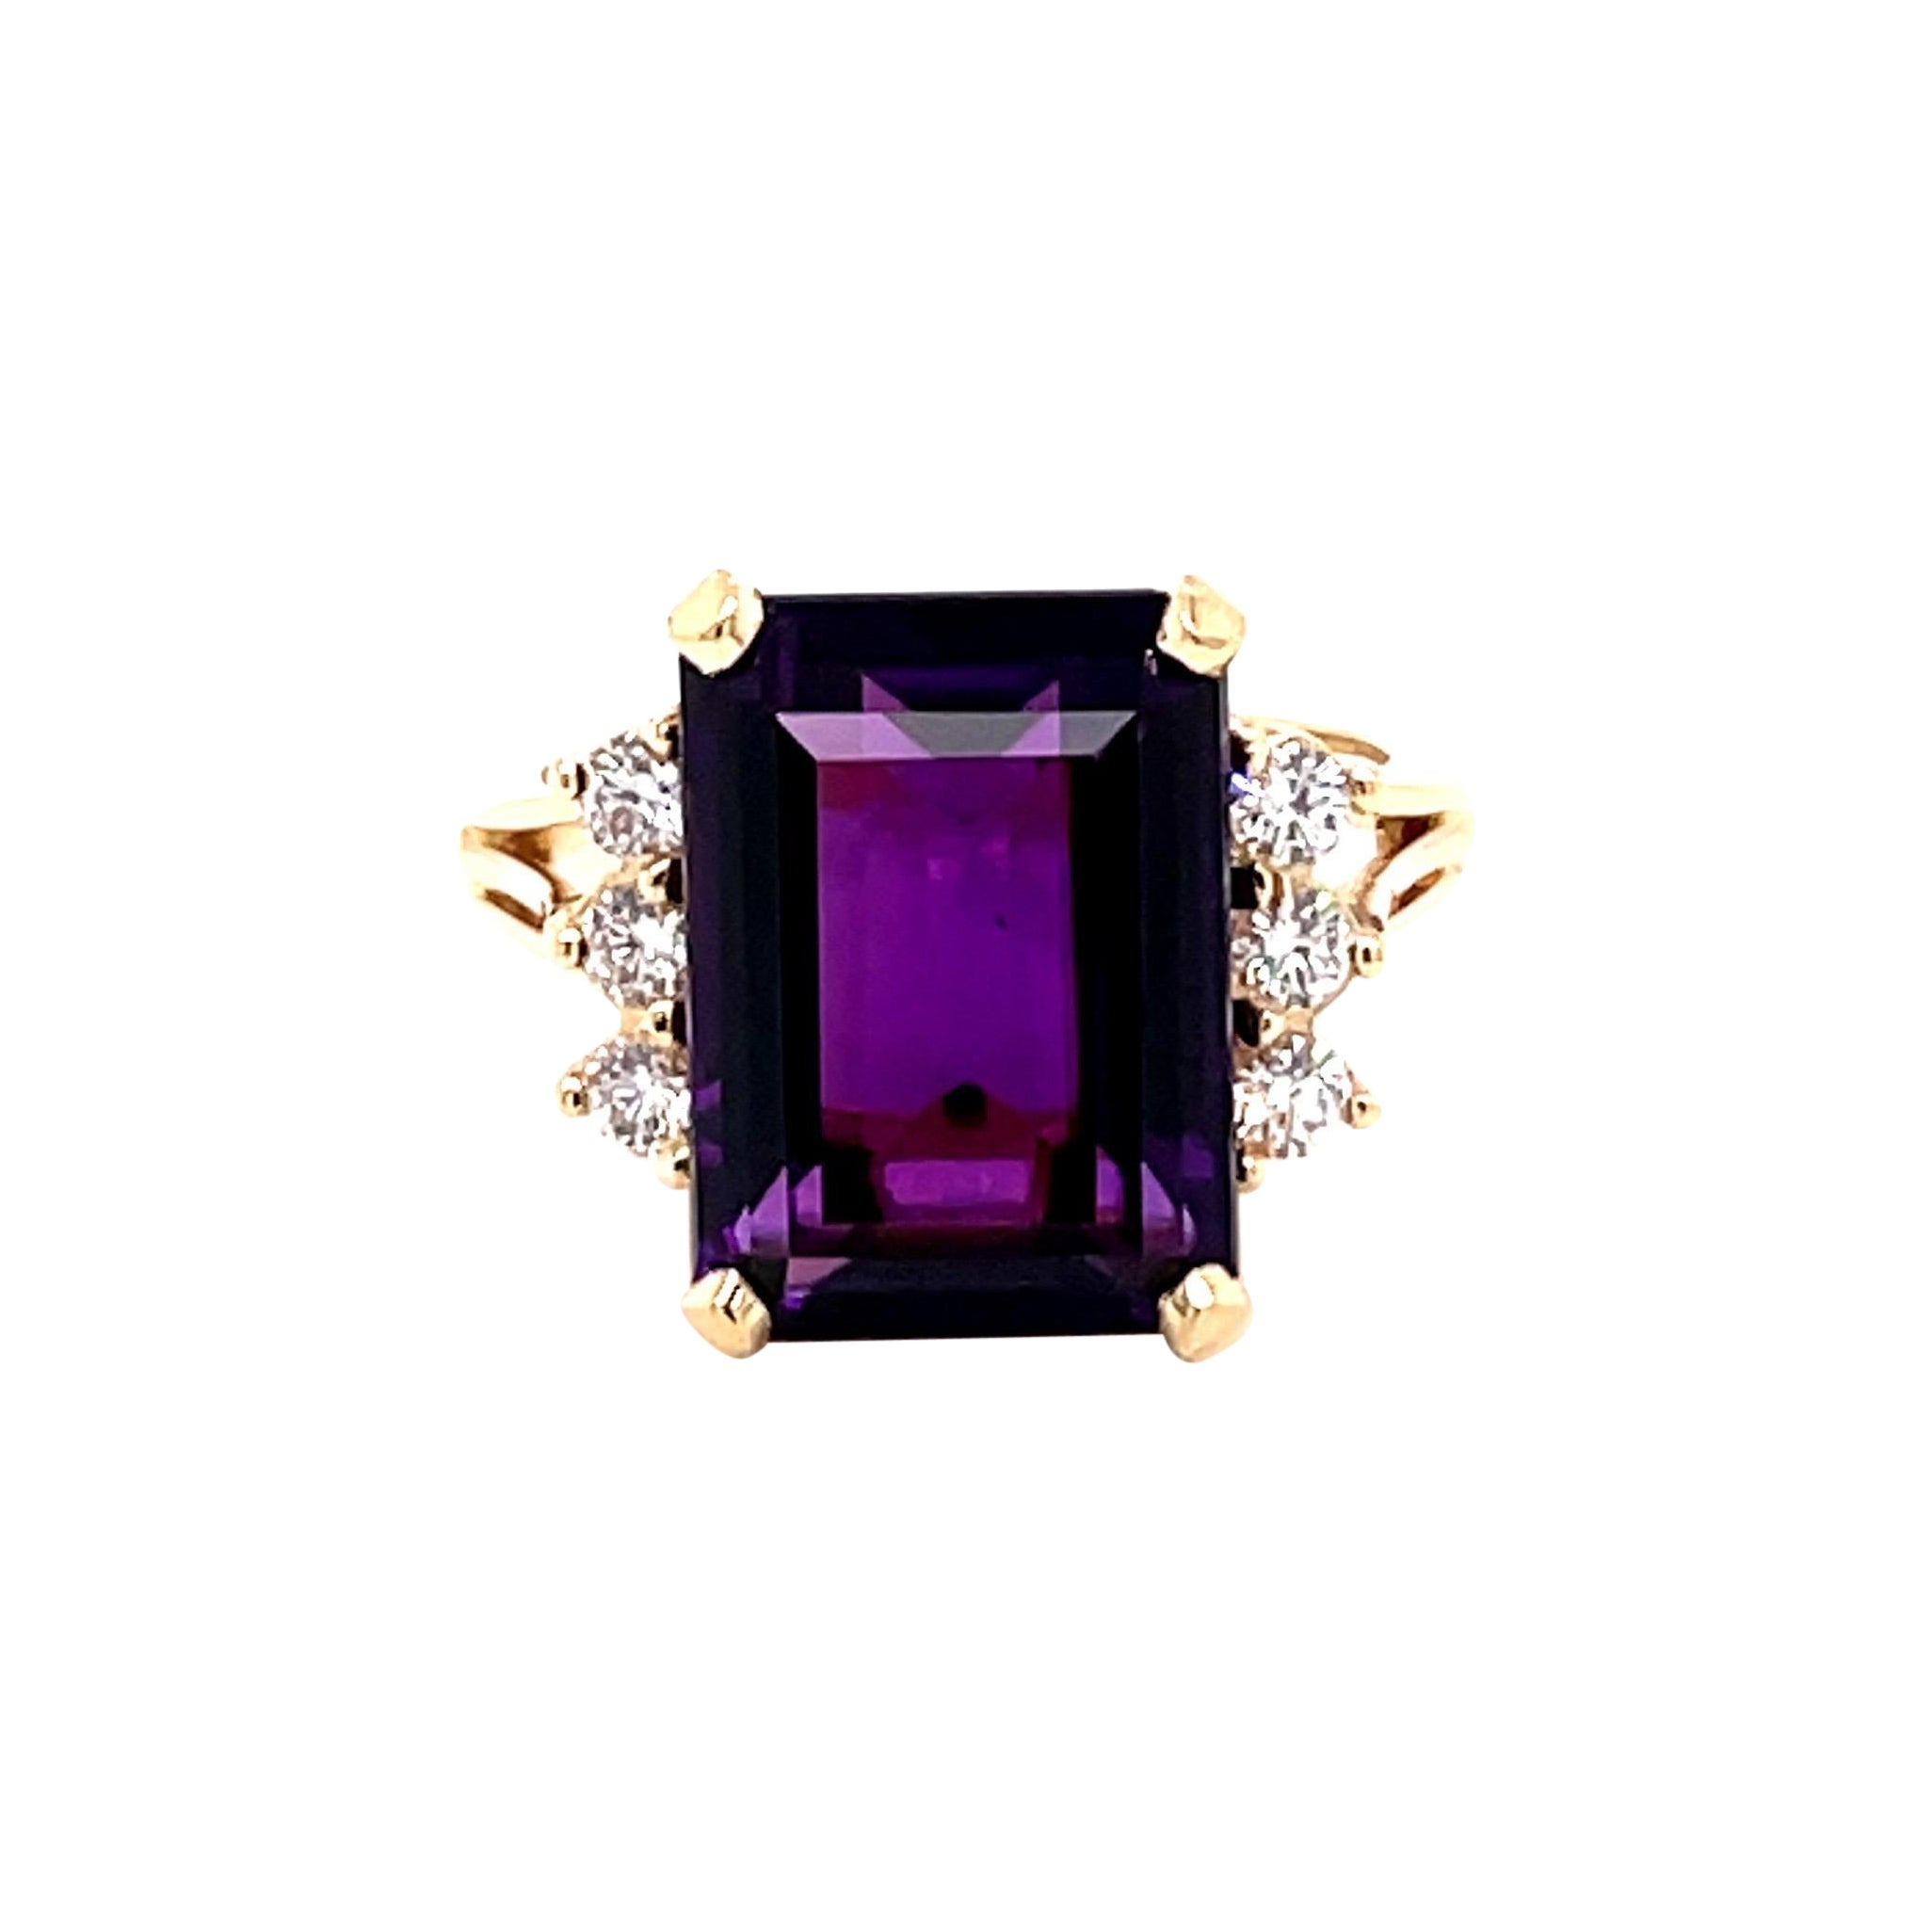 Vintage 1980's 7.35ct Emerald Cut Amethyst Ring with Diamonds